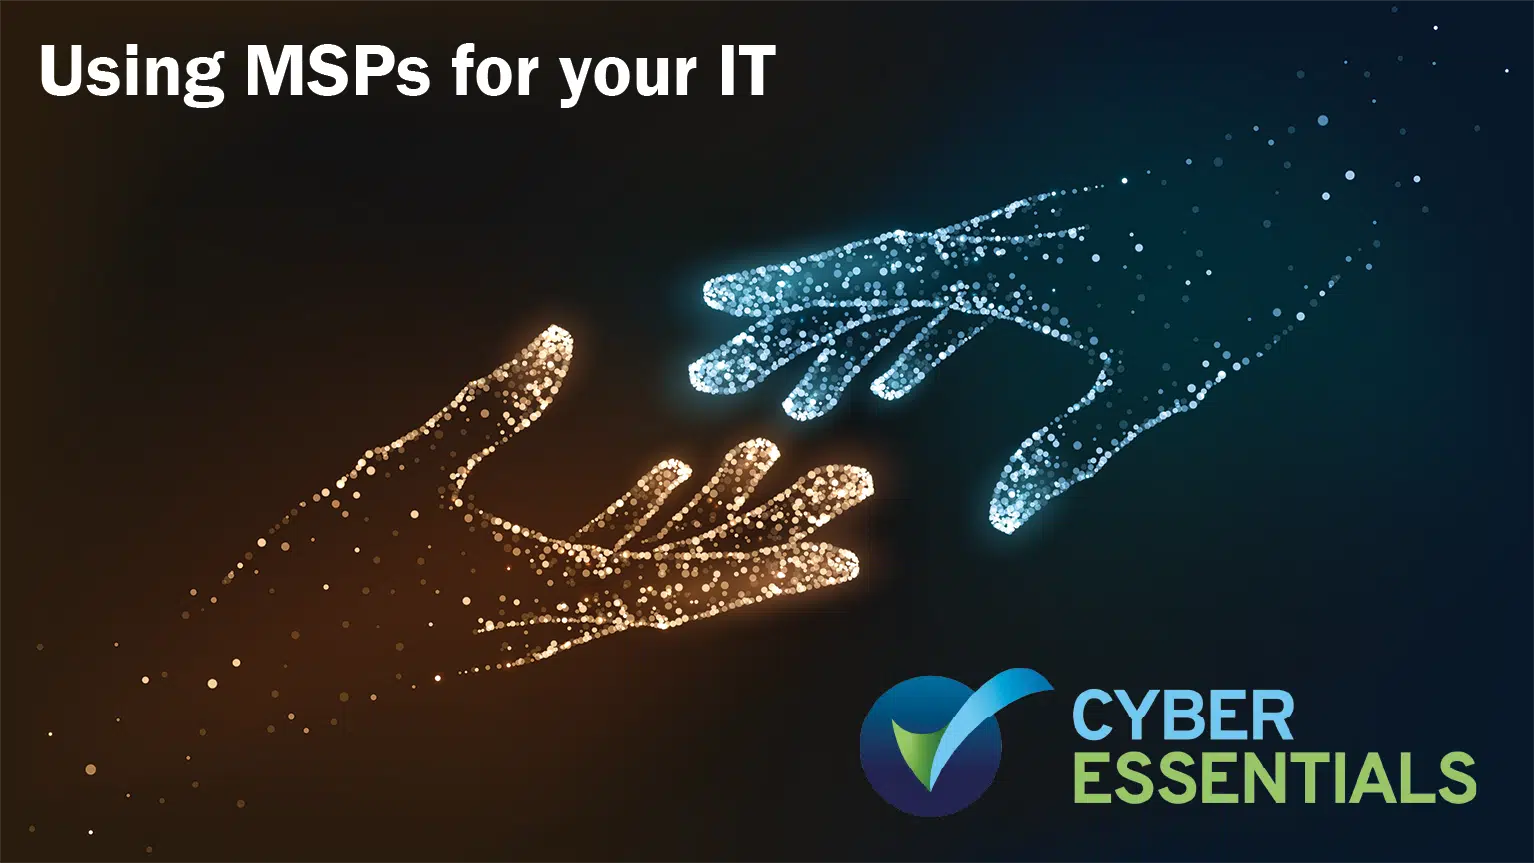 Cyber Essentials and MSP